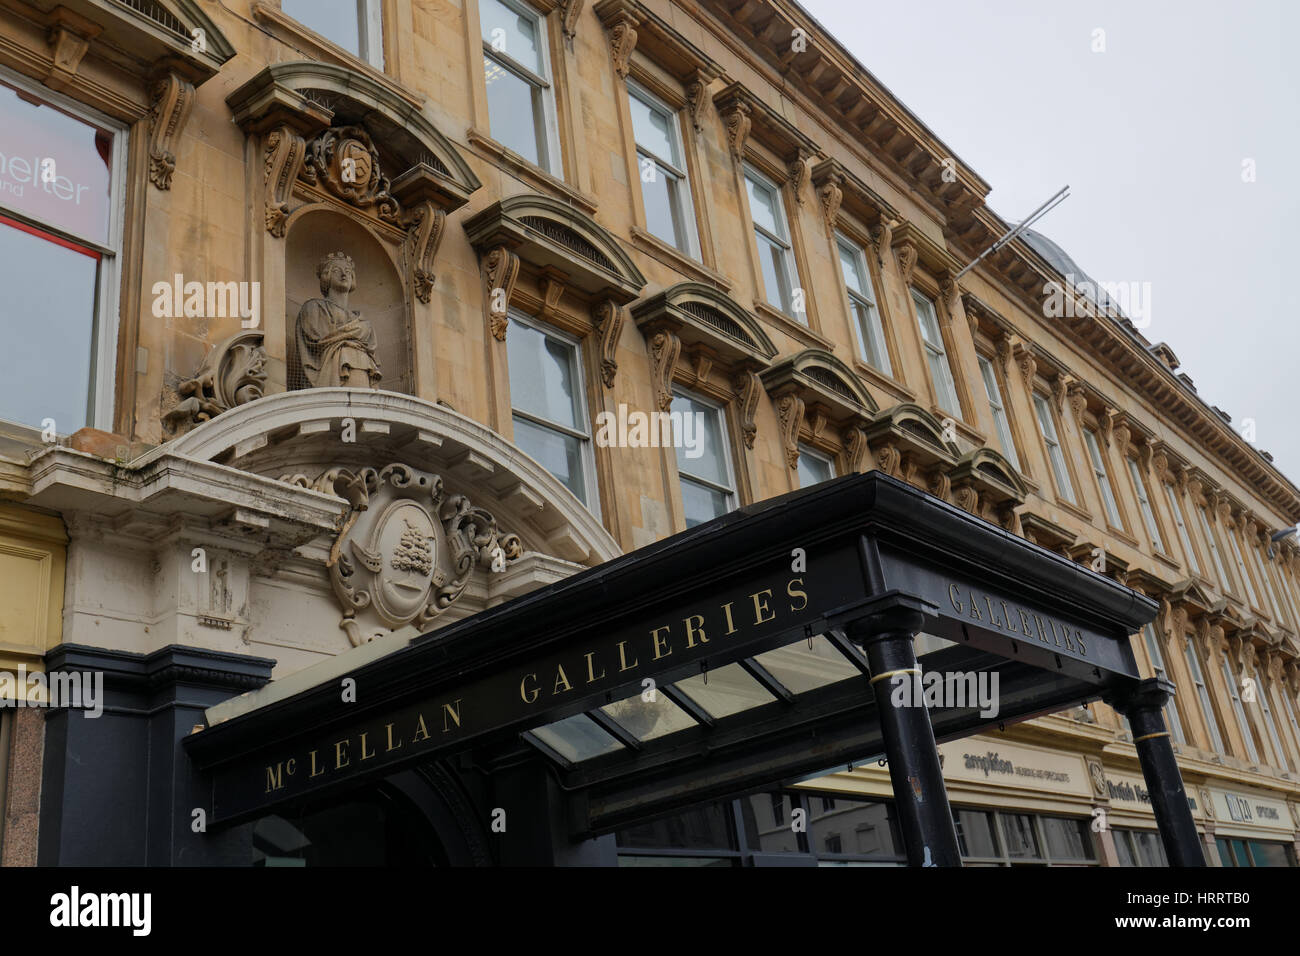 McLellan Galleries are an exhibition space in the city of Glasgow Stock Photo